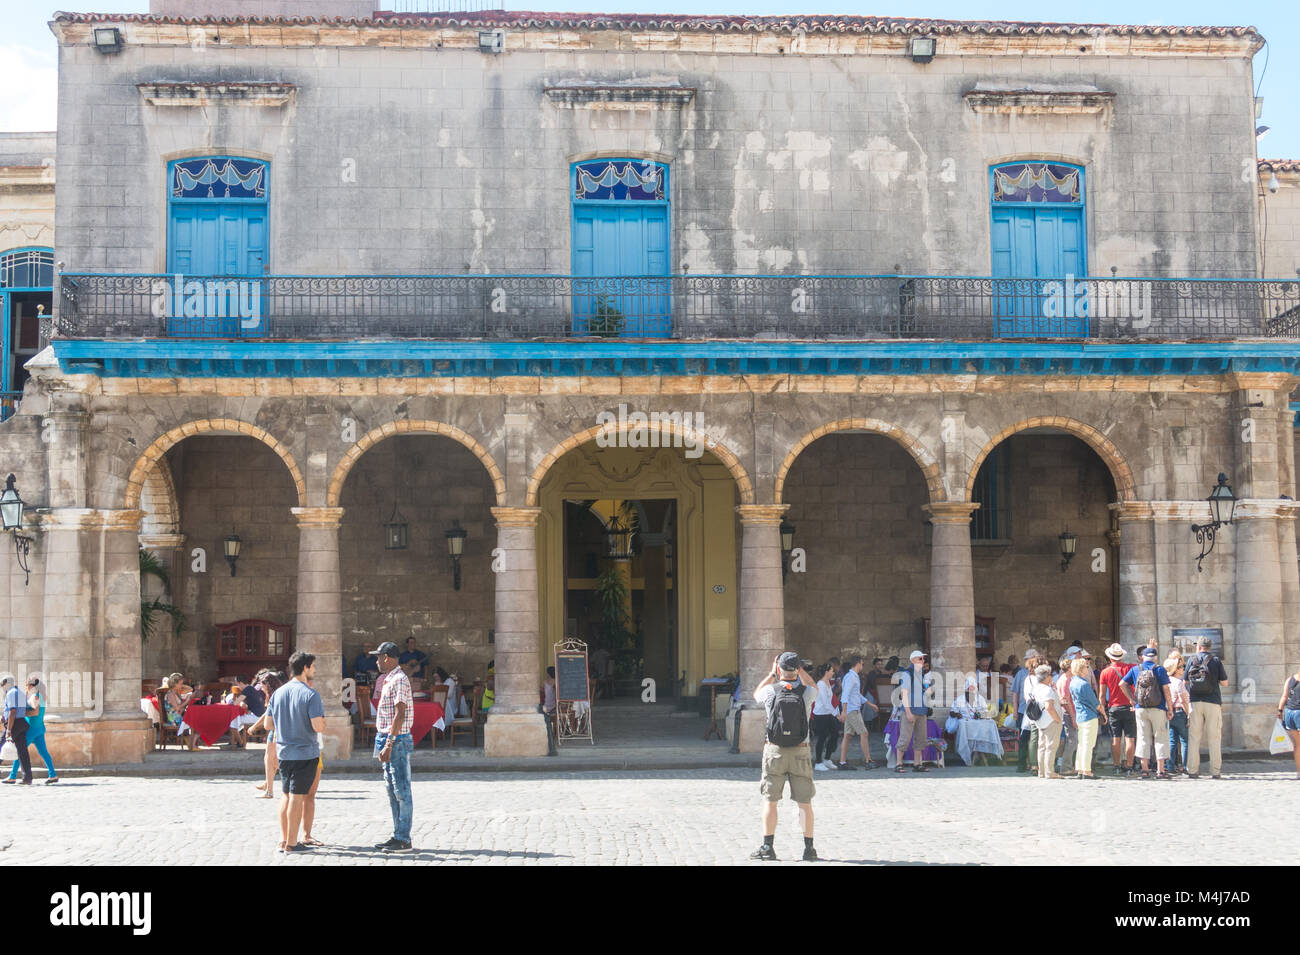 HAVANA, CUBA - JANUARY 16, 2017: Arcades of the Palace of the Conde Lombillo. in the Cathedral Square, Old Havana, Cuba. Stock Photo